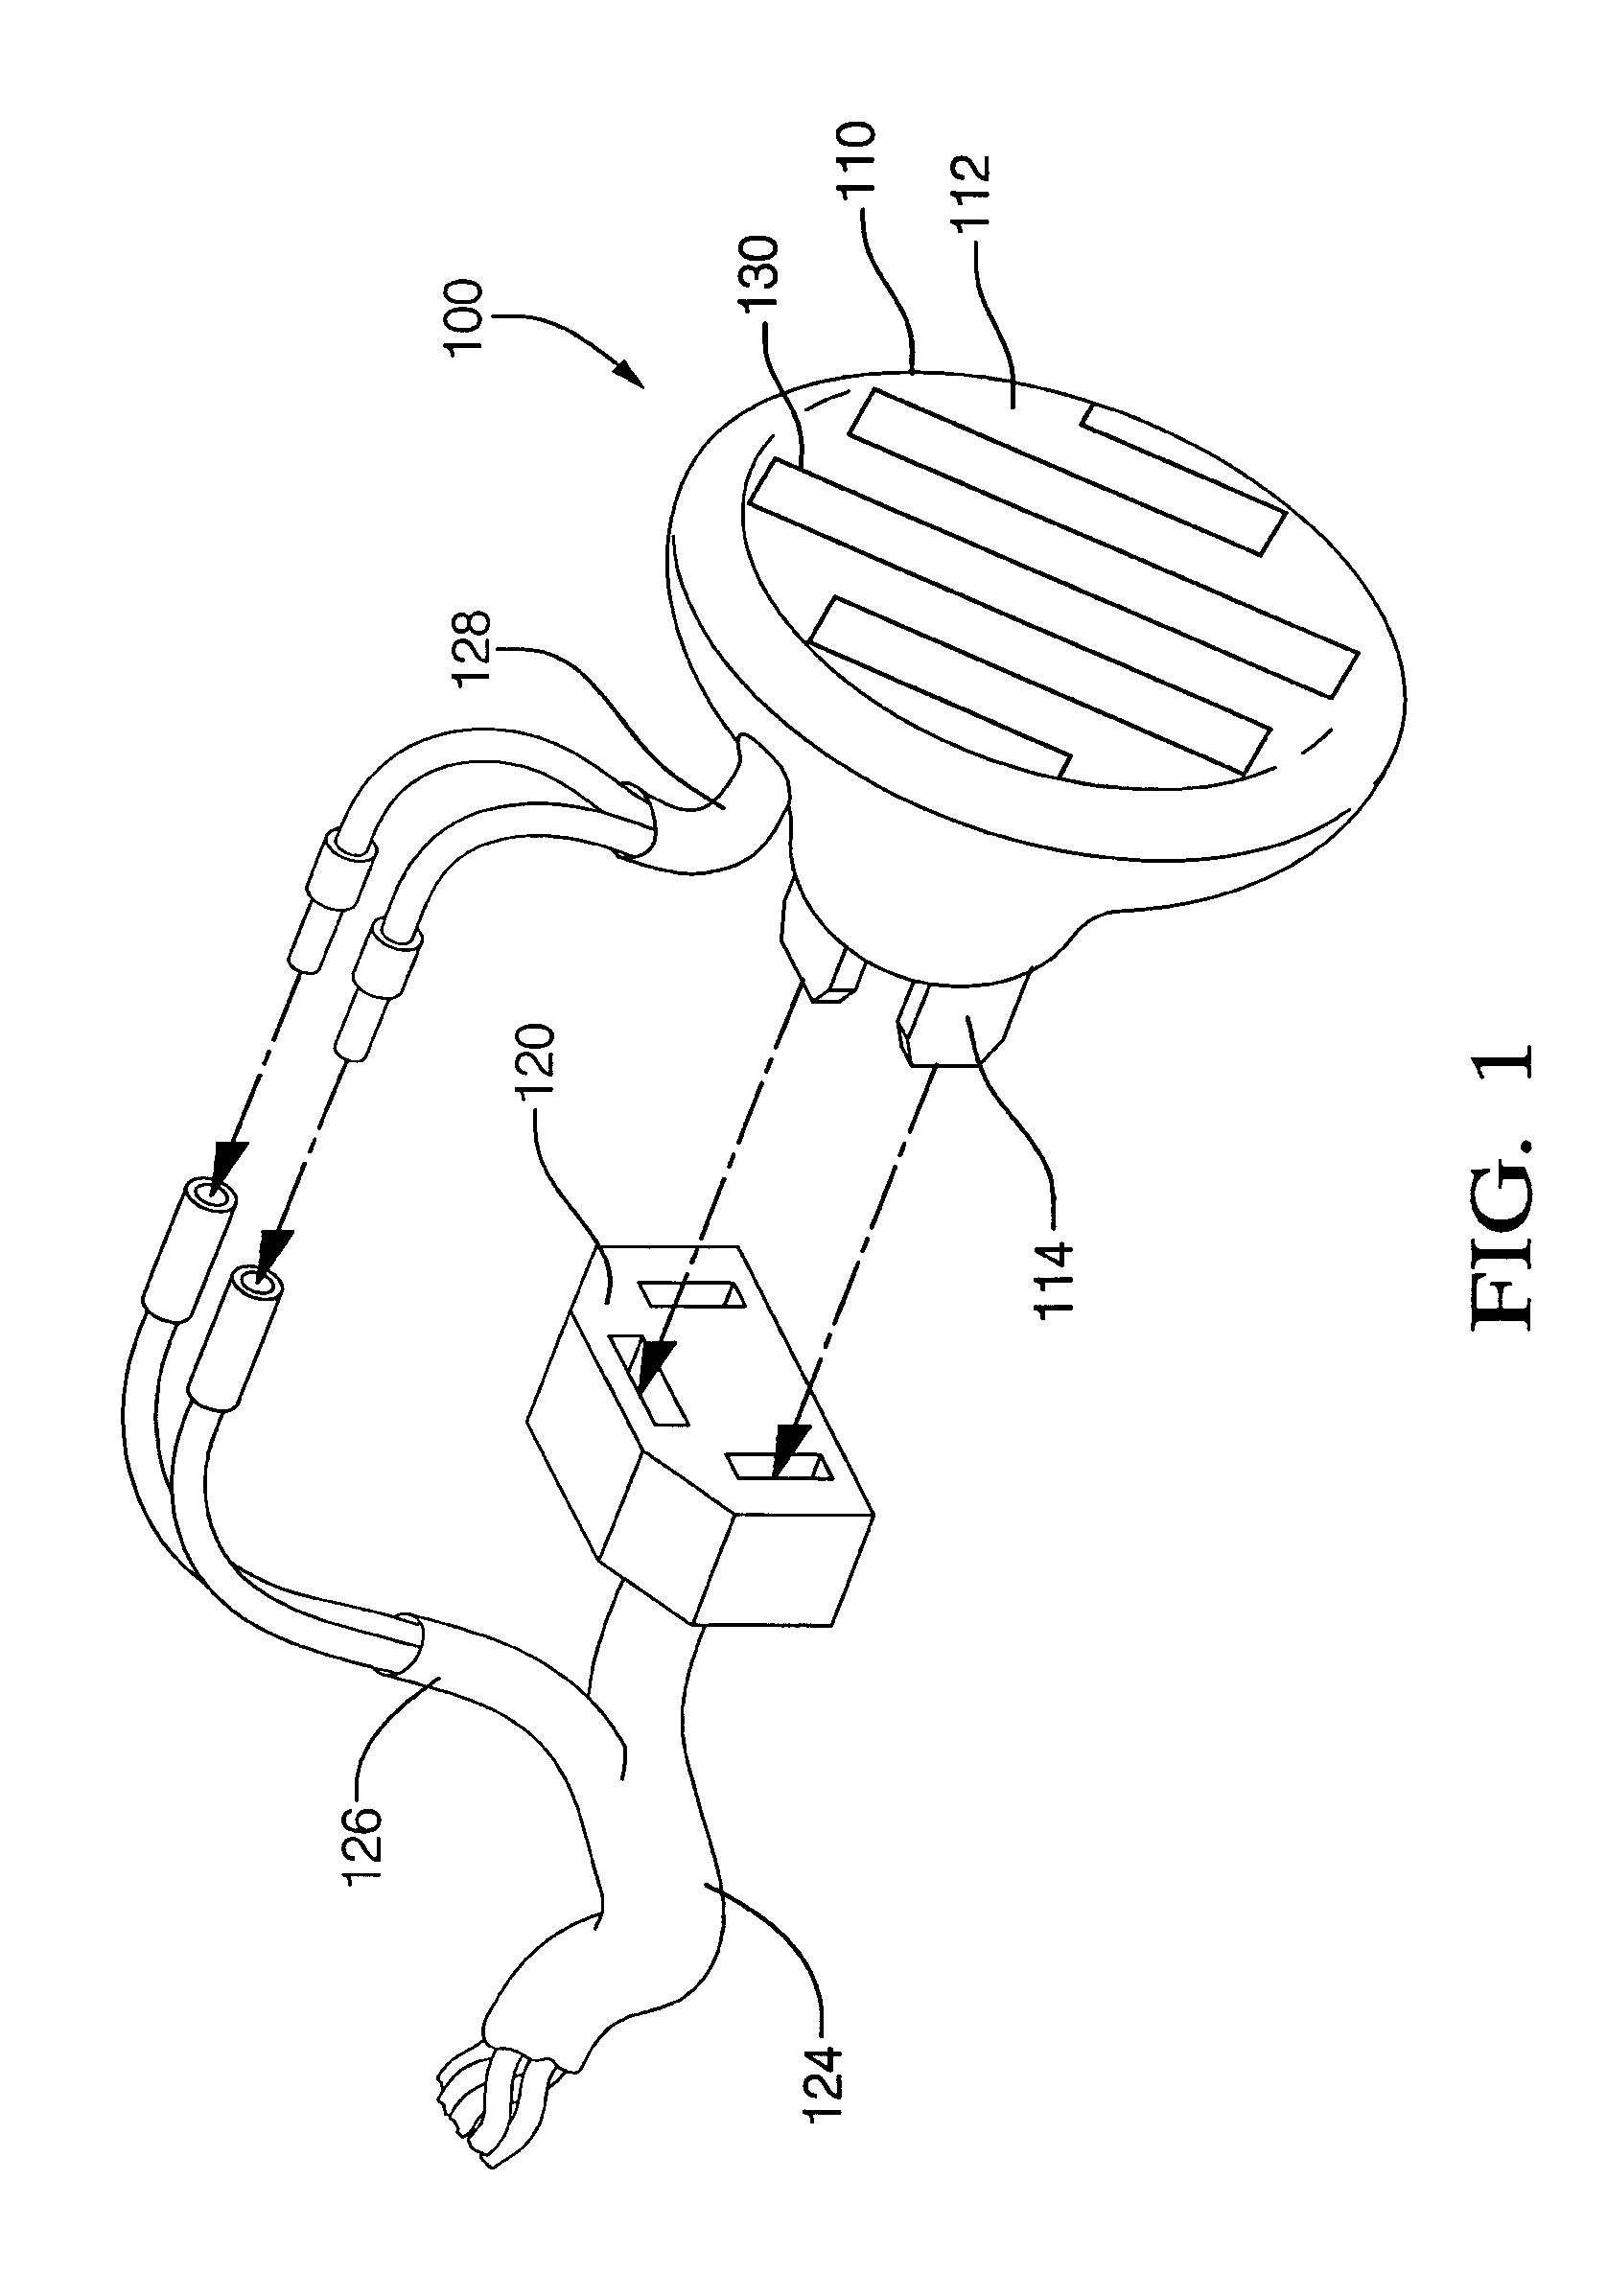 Directional antenna having a selected beam pattern